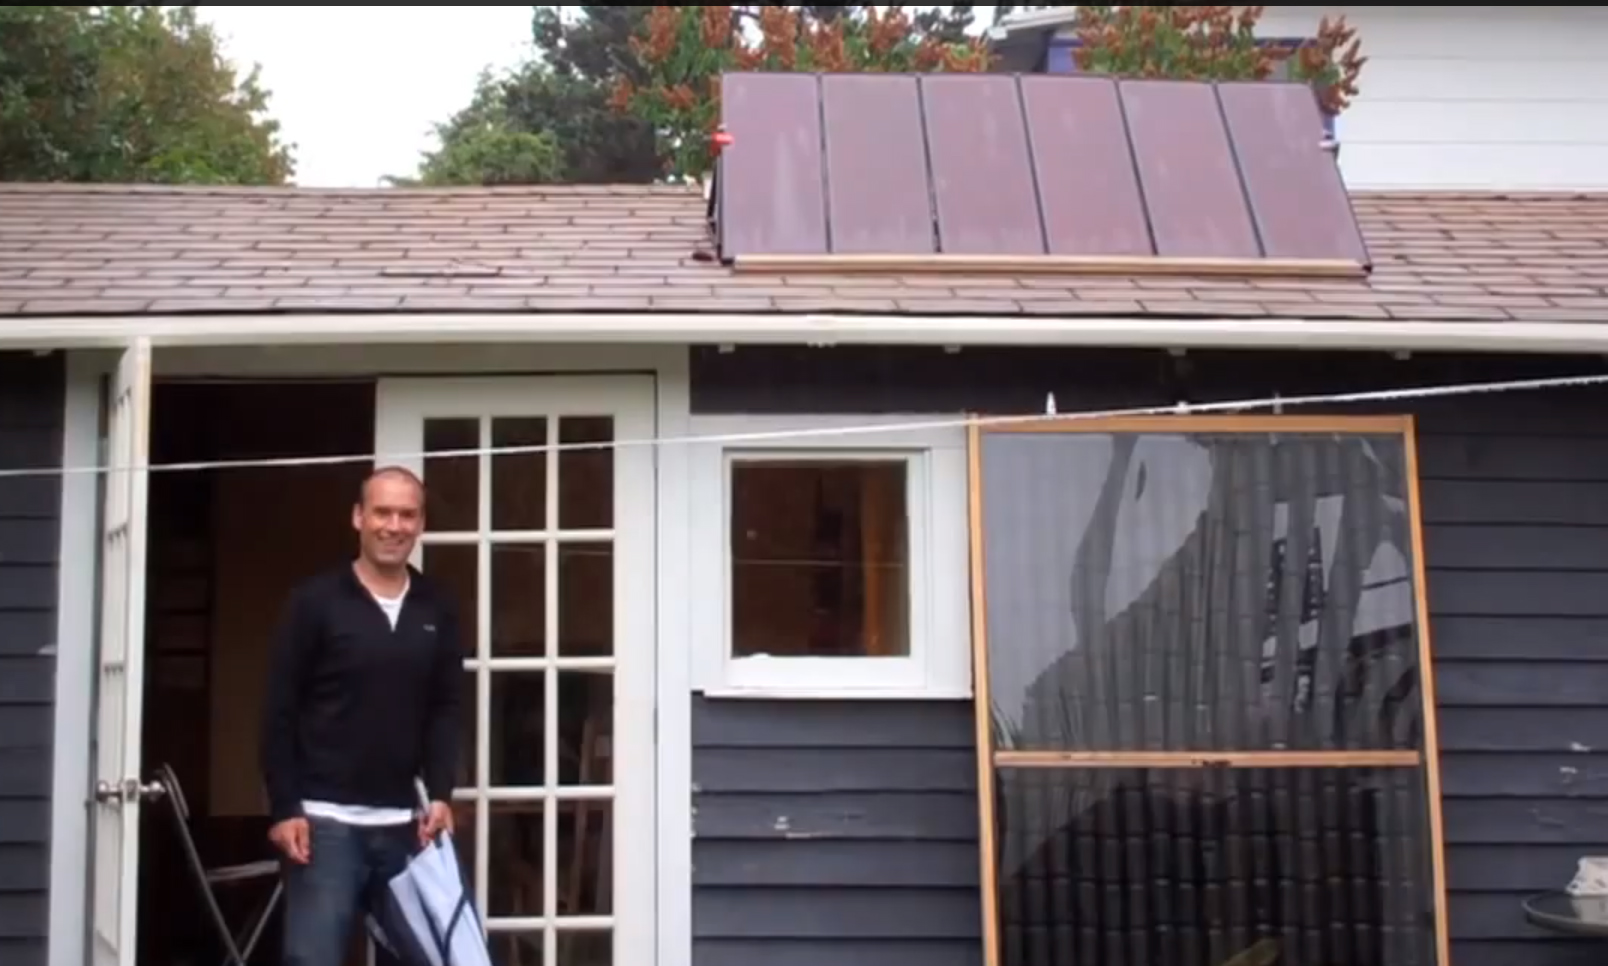 Check Out This Solar-Powered Heater Made Out of Recycled Aluminum Cans